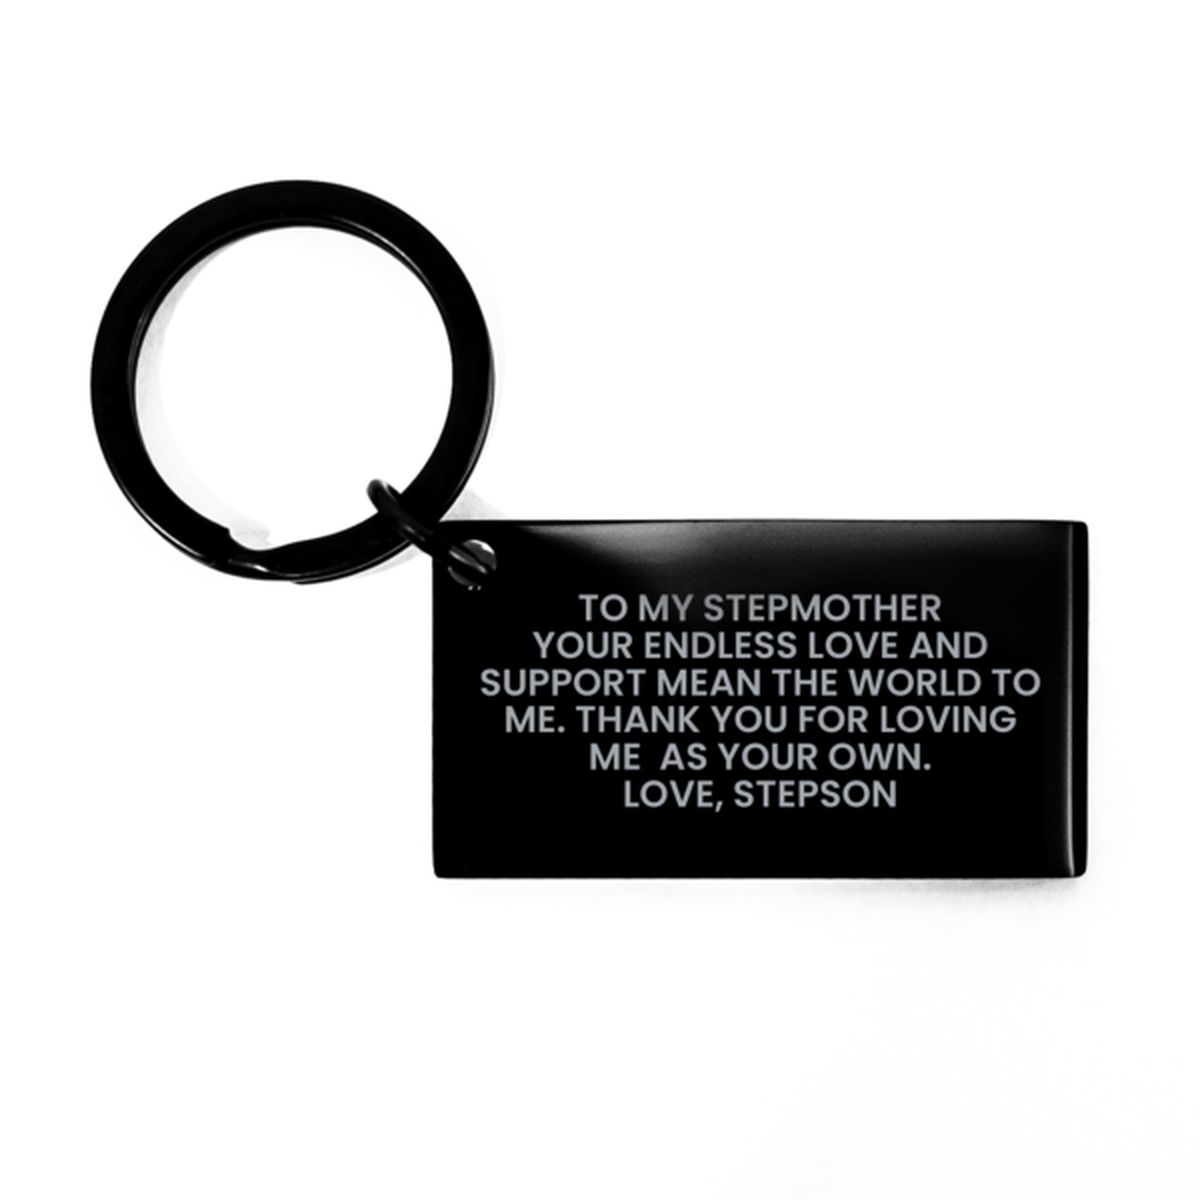 To My Stepmother   Black Keychain, Your Endless Love, Valentines Gifts For Stepmother From Stepson, Birthday Gifts For Women